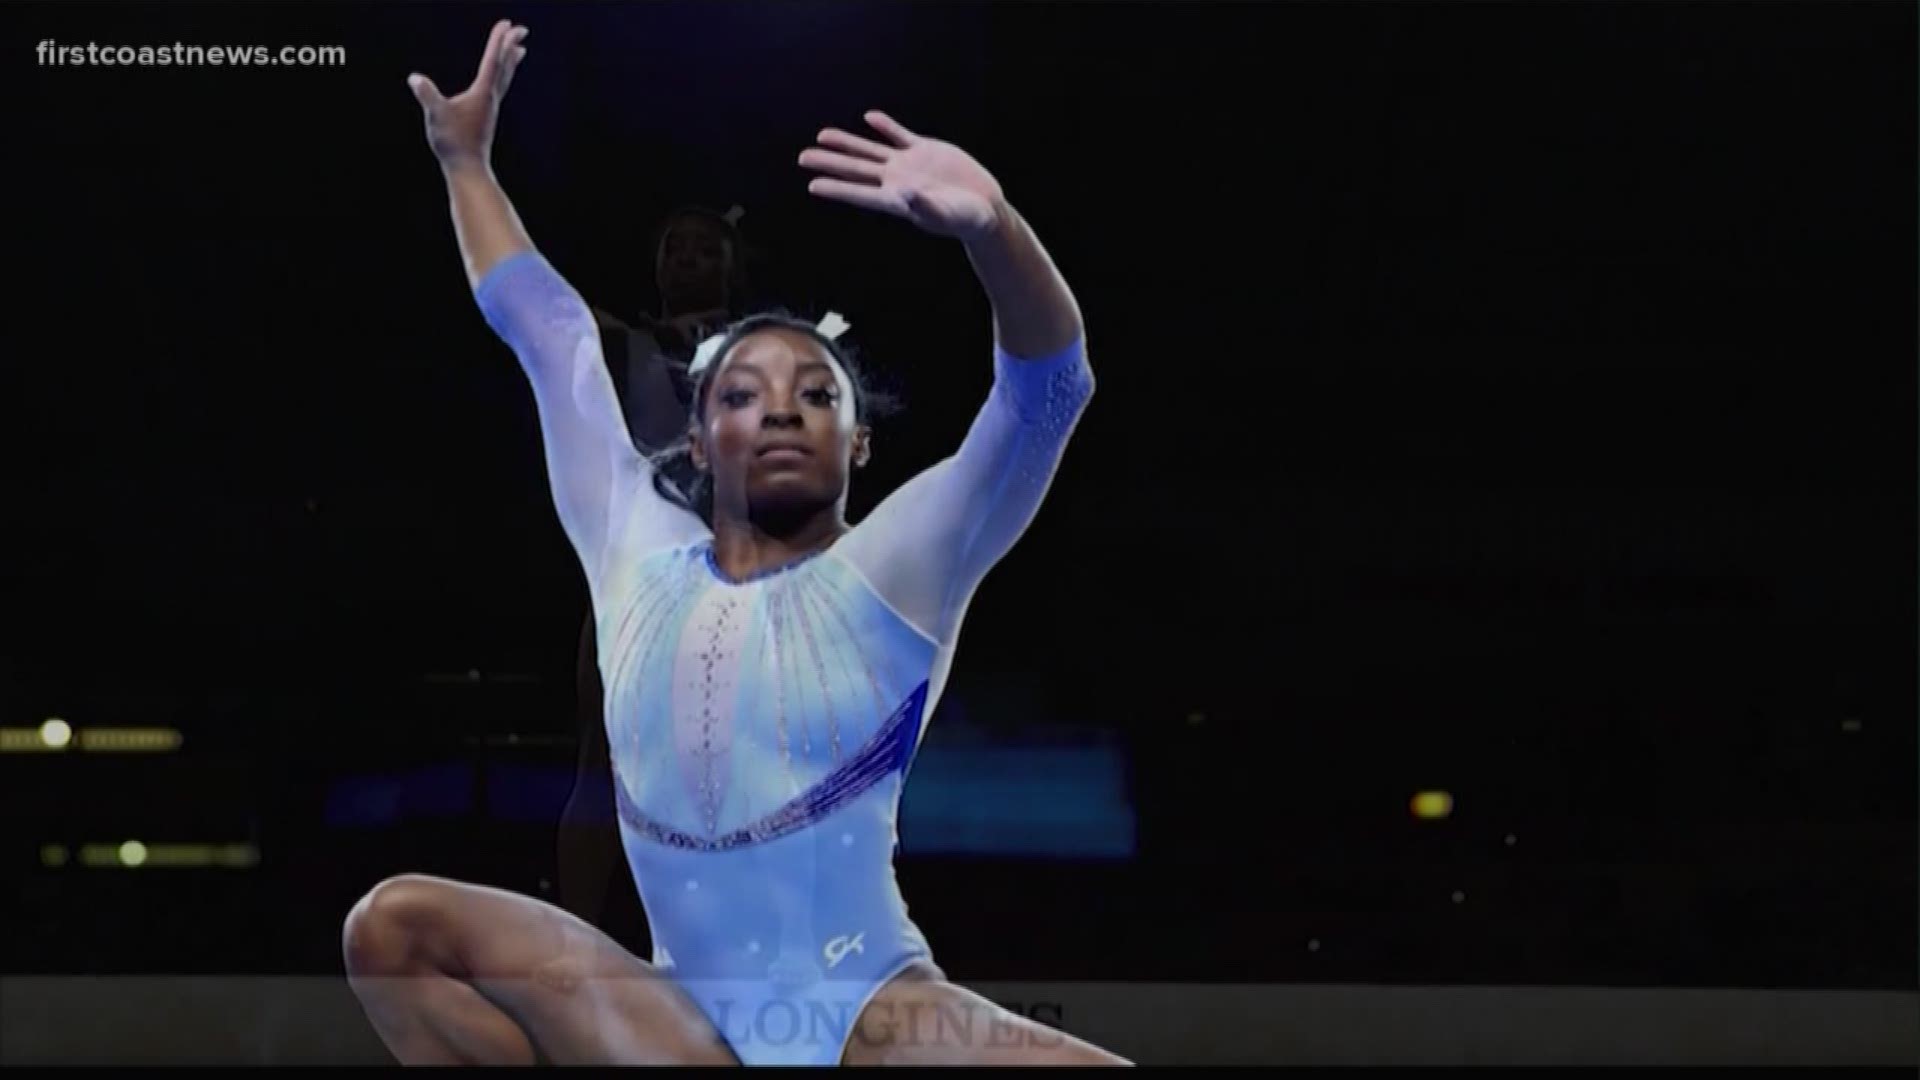 Biles is one of gymnastic's fiercest competitors but now she's getting attention for her reaction to traditional beauty standards.